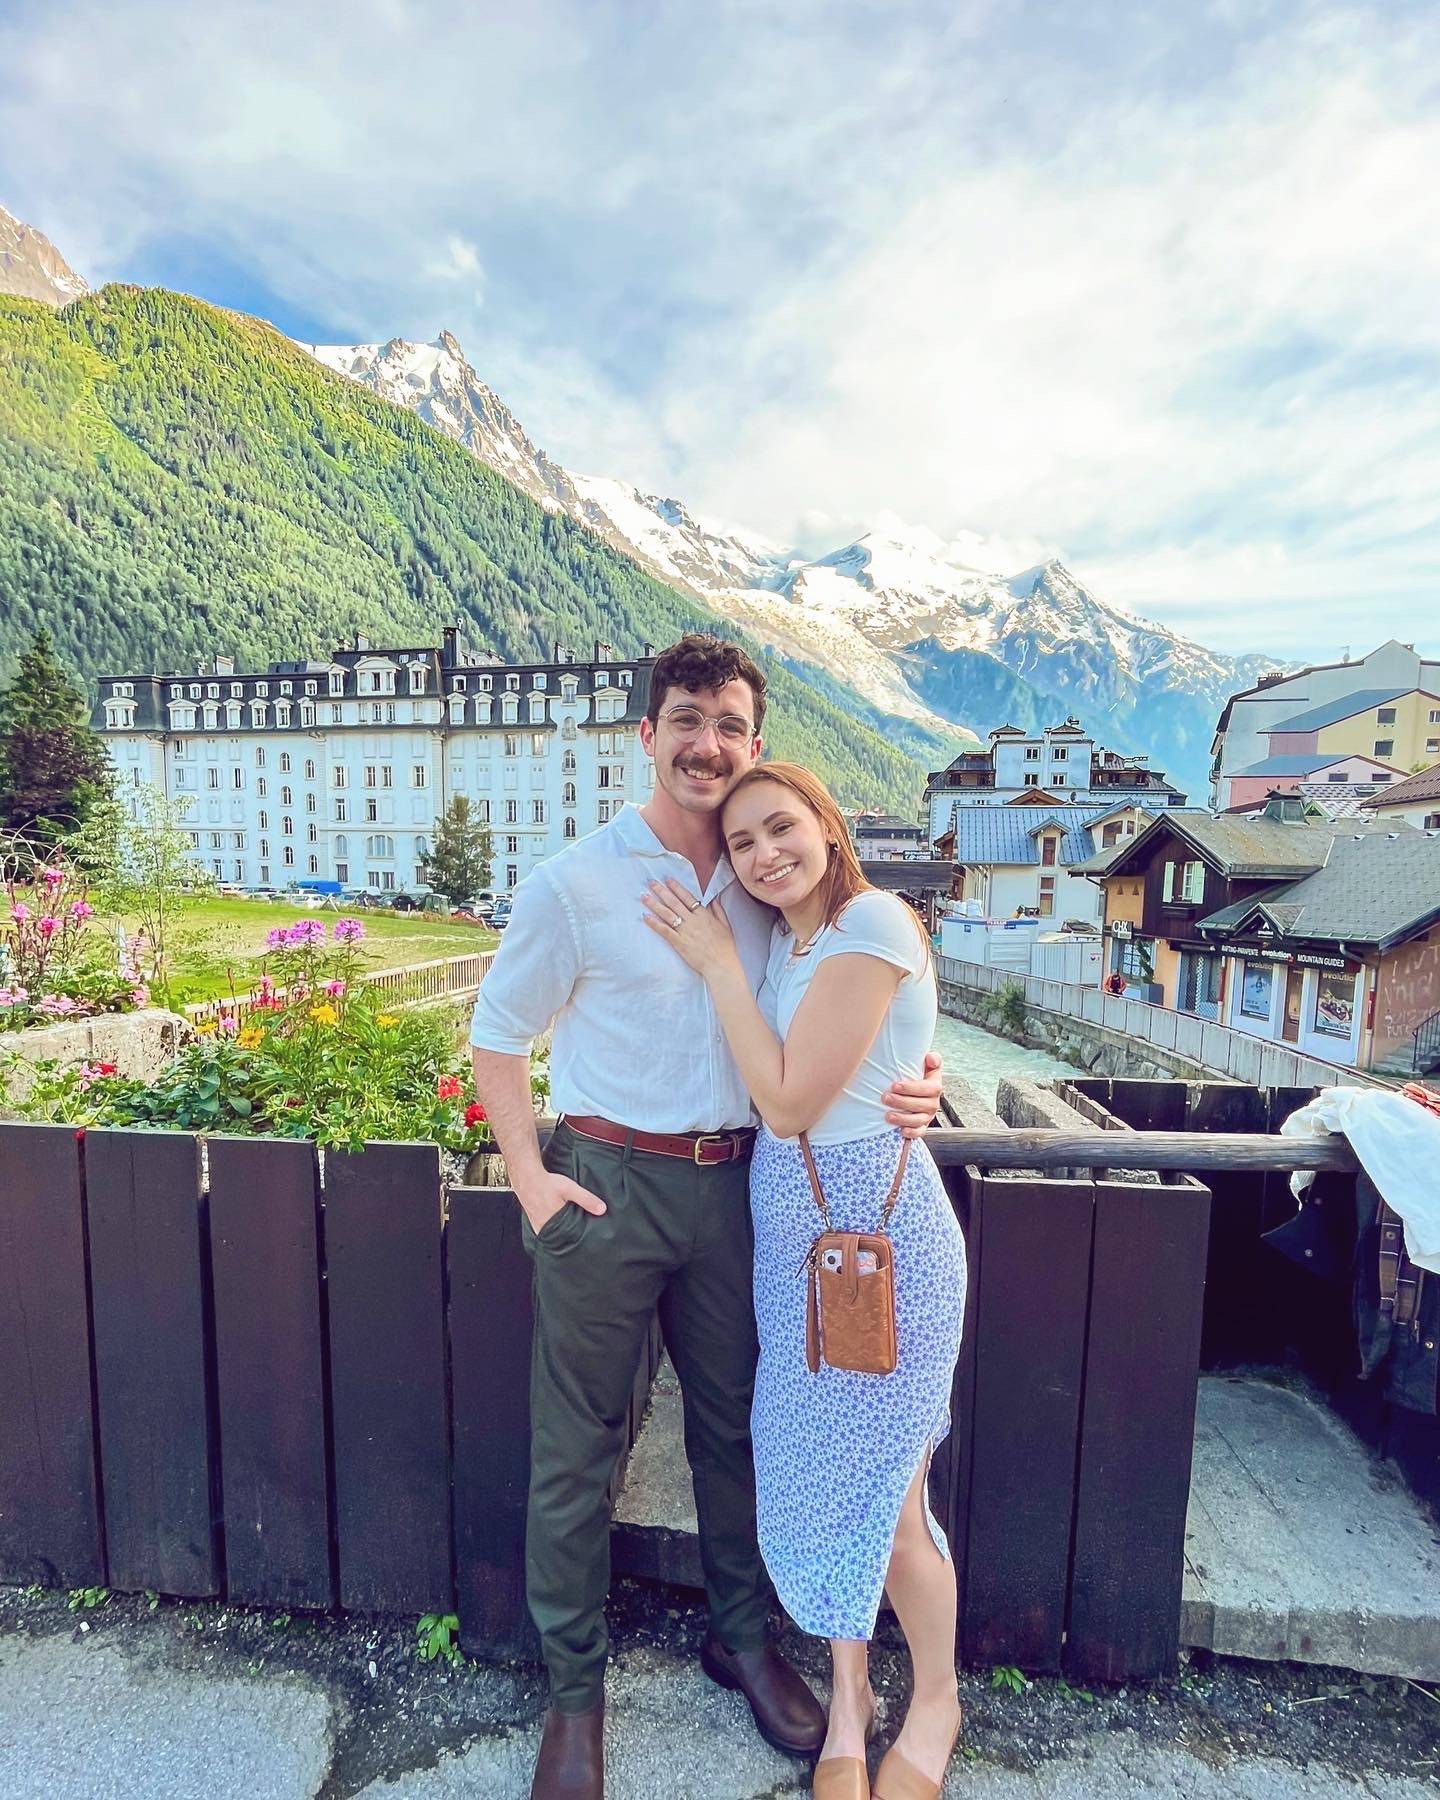 Dan and Mackenzie in Switzerland with mountains in the backgound